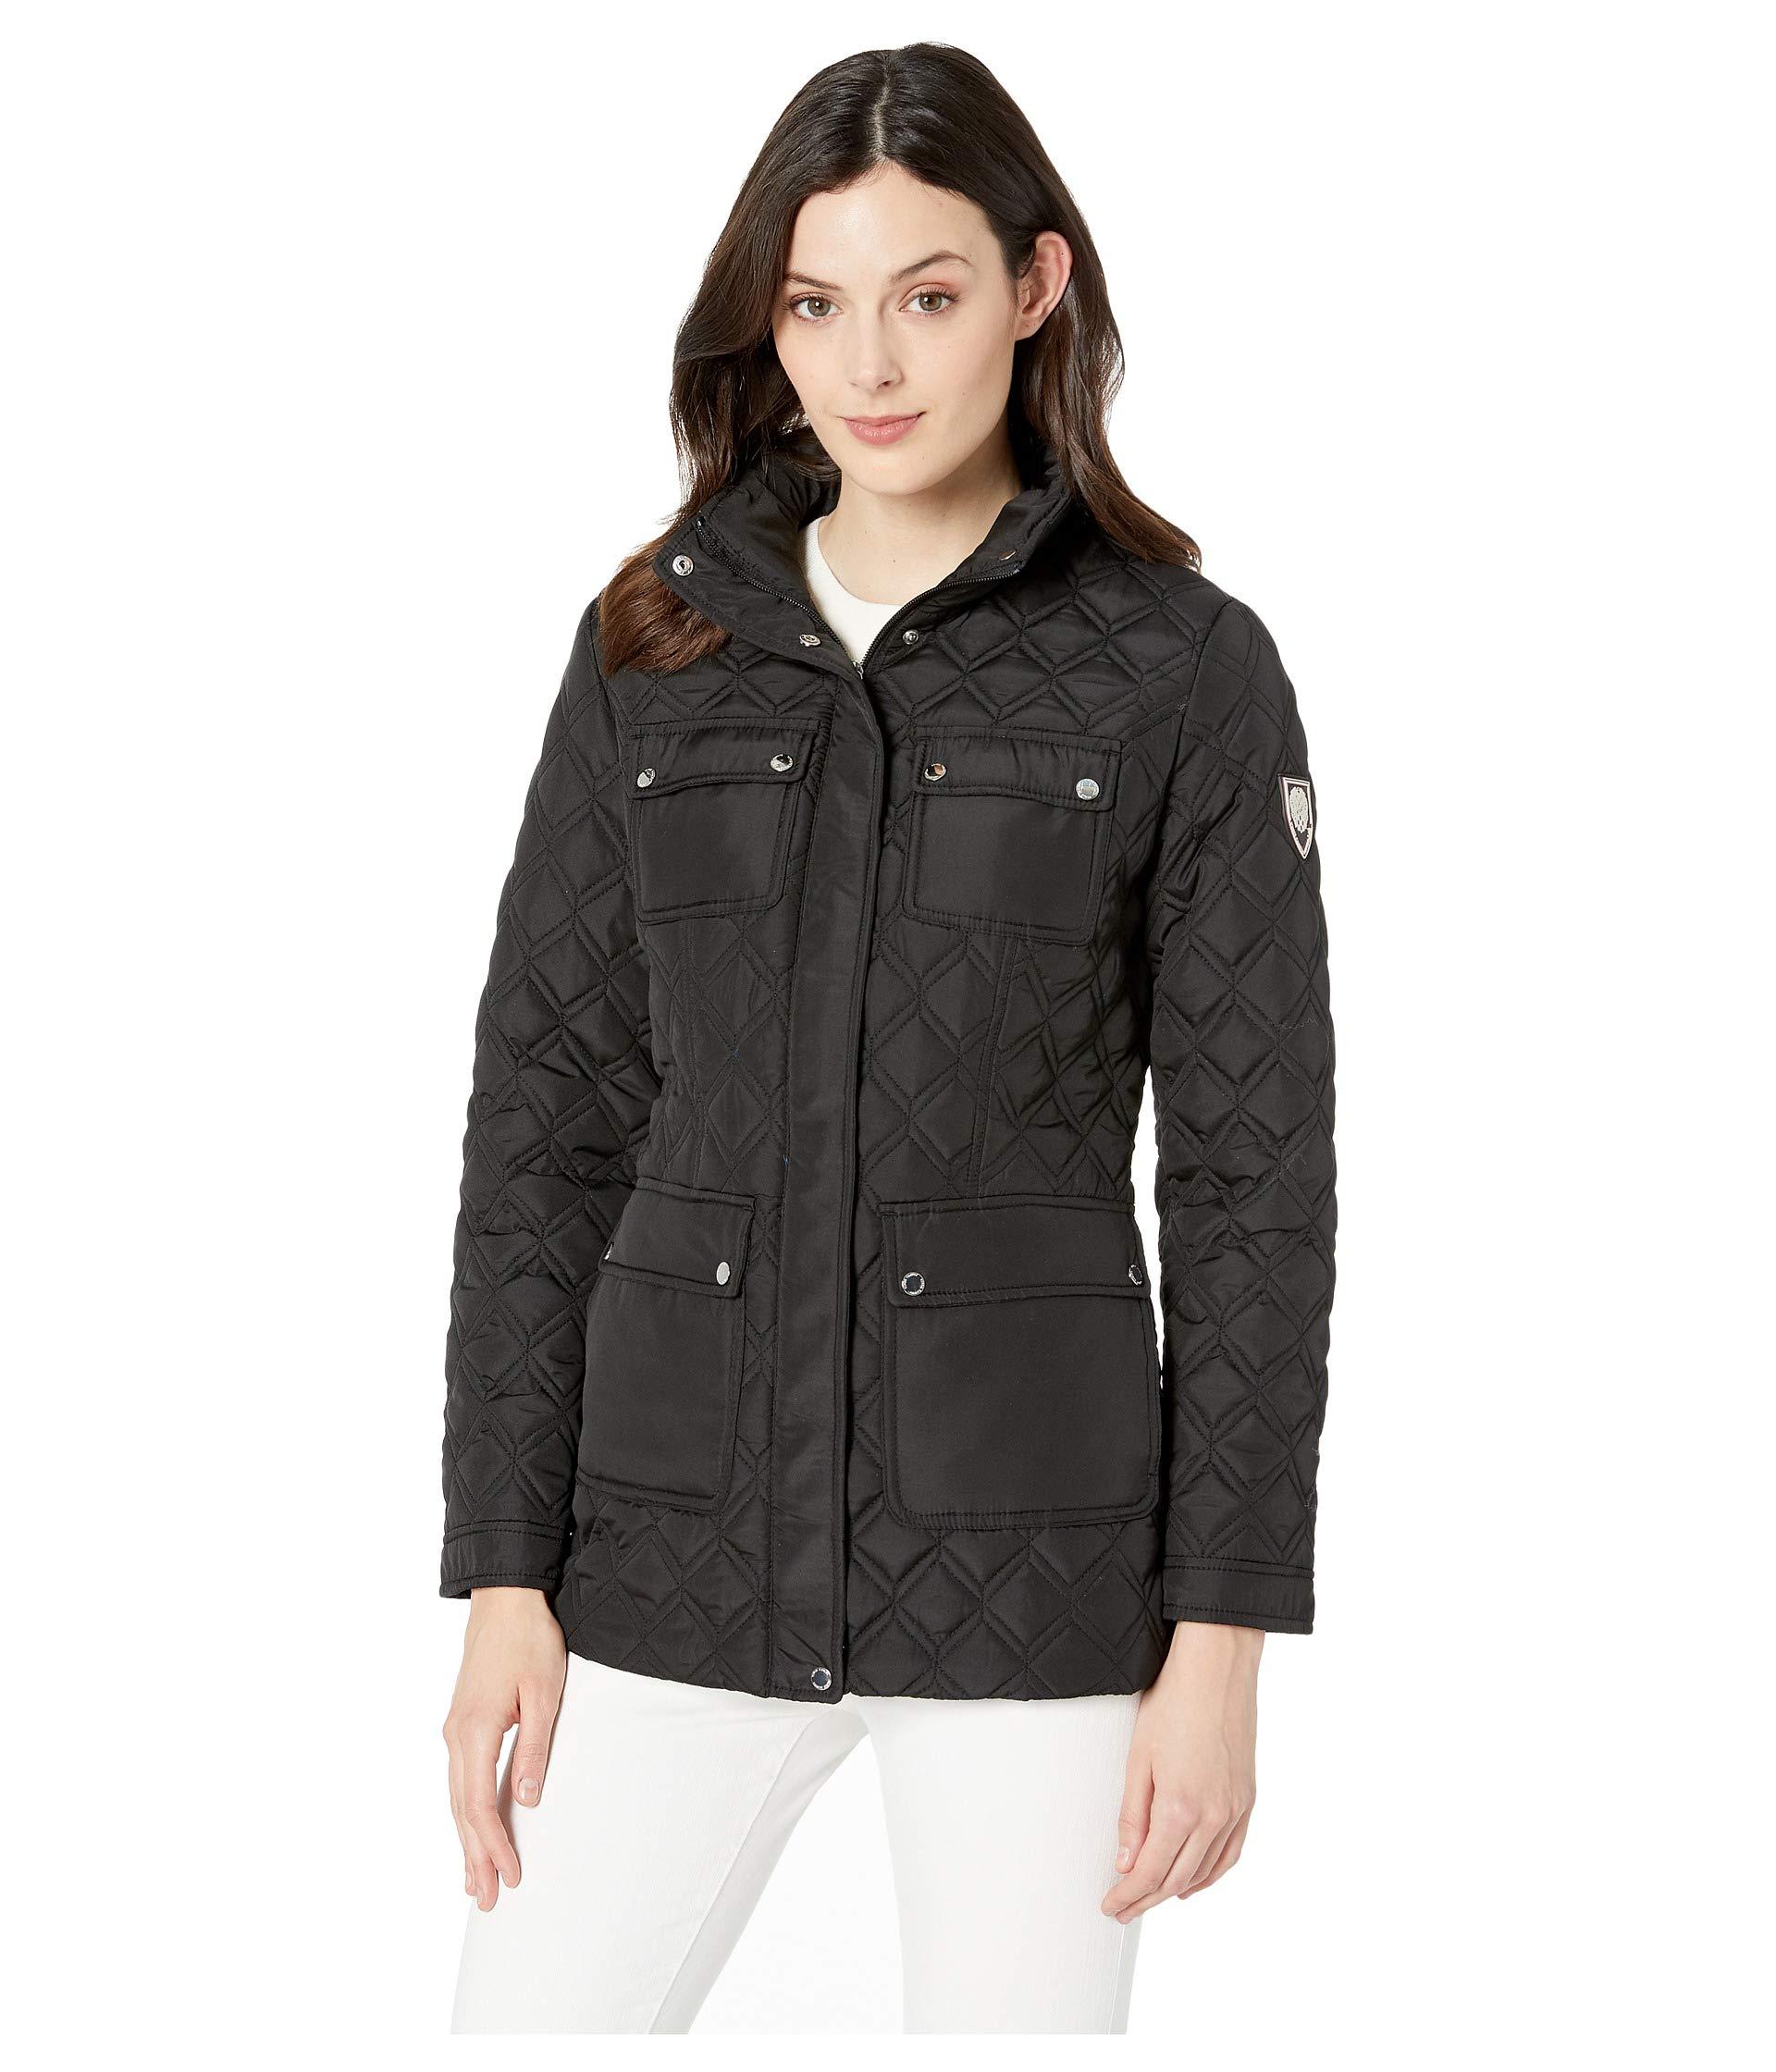 Vince Camuto Synthetic 28 Quilted Jacket in Black - Lyst